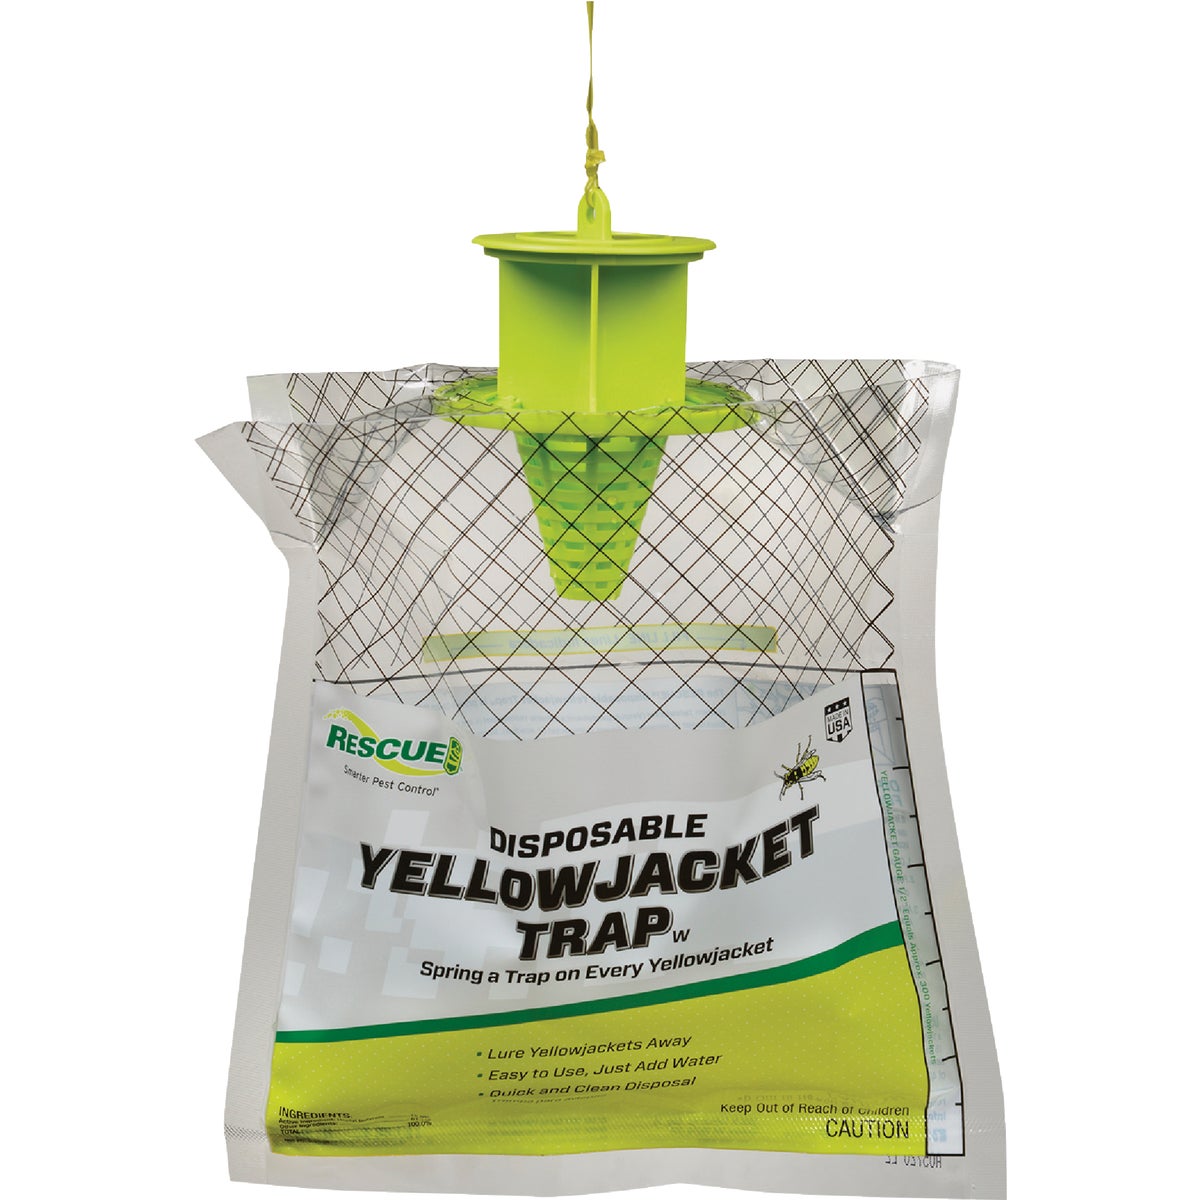 Item 700928, Yellow jacket trap for areas in the Mountain and Pacific time zones.